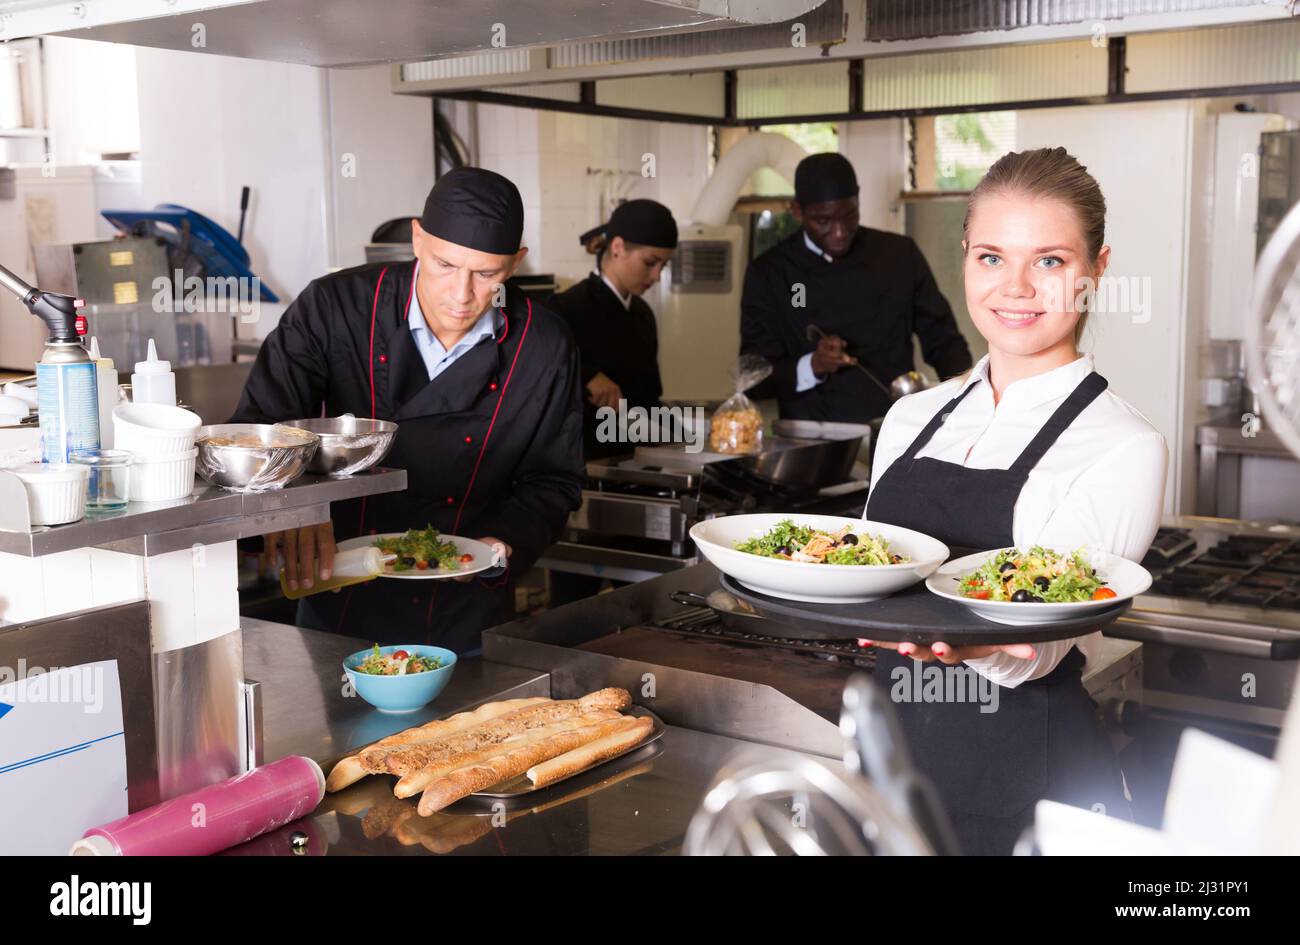 Waitress with dishes in kitchen Stock Photo